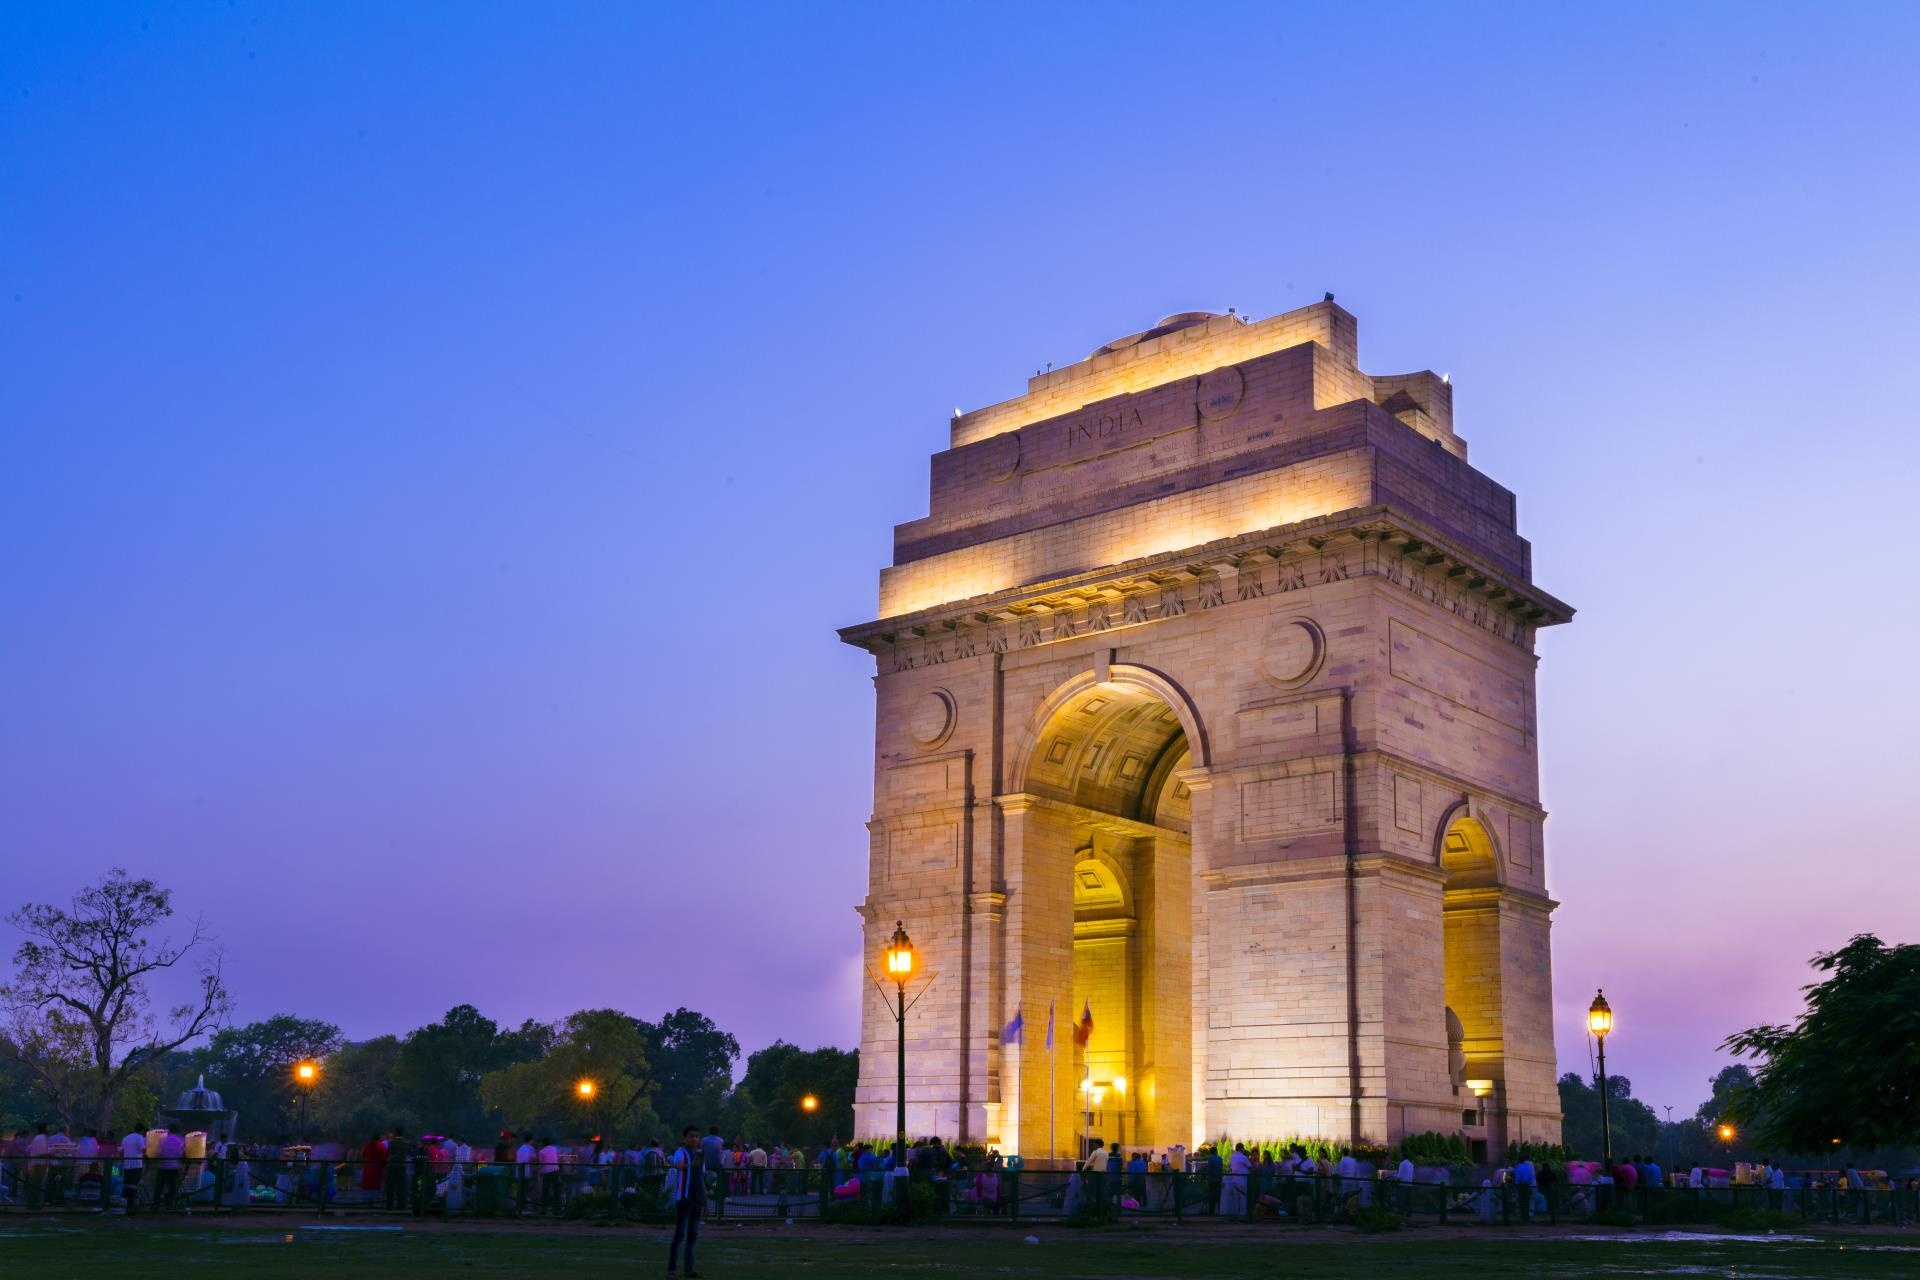 tourhub | Agora Voyages | Grand Monuments & Imperial Cities in India 